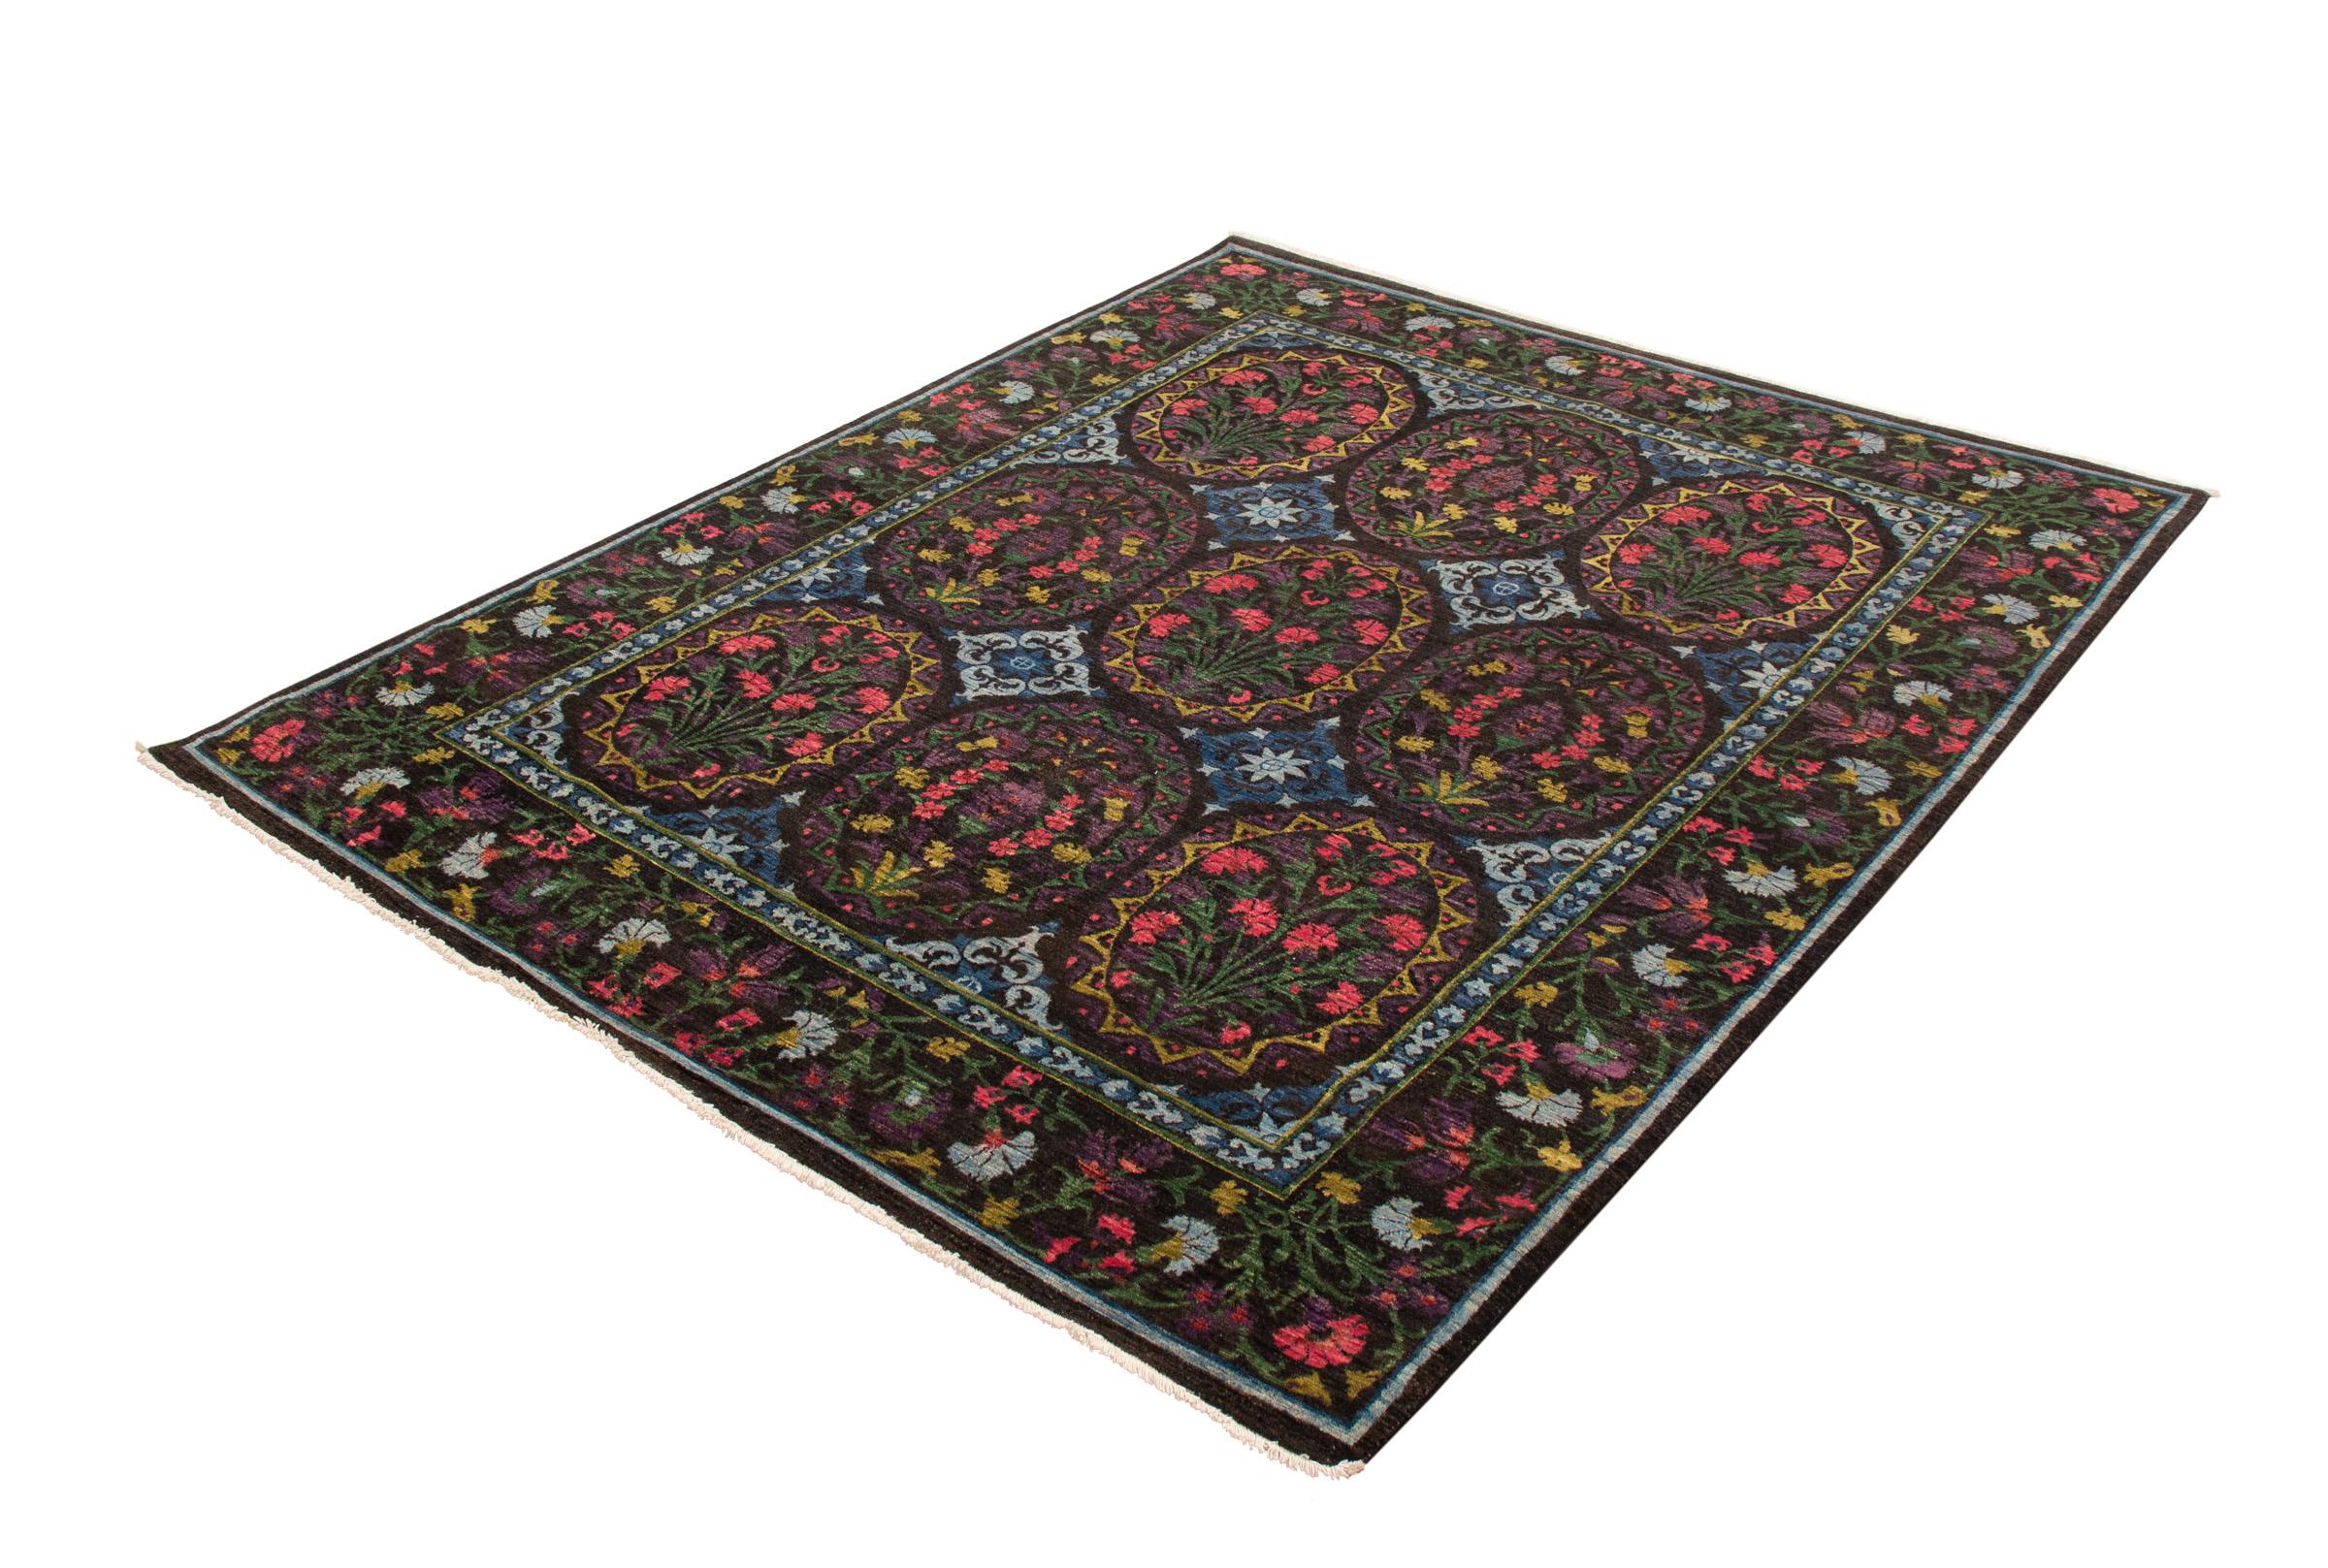 Persian Transitional Hand-knotted Wool Lahore Carpet with Floral Design, 8' x 10' For Sale